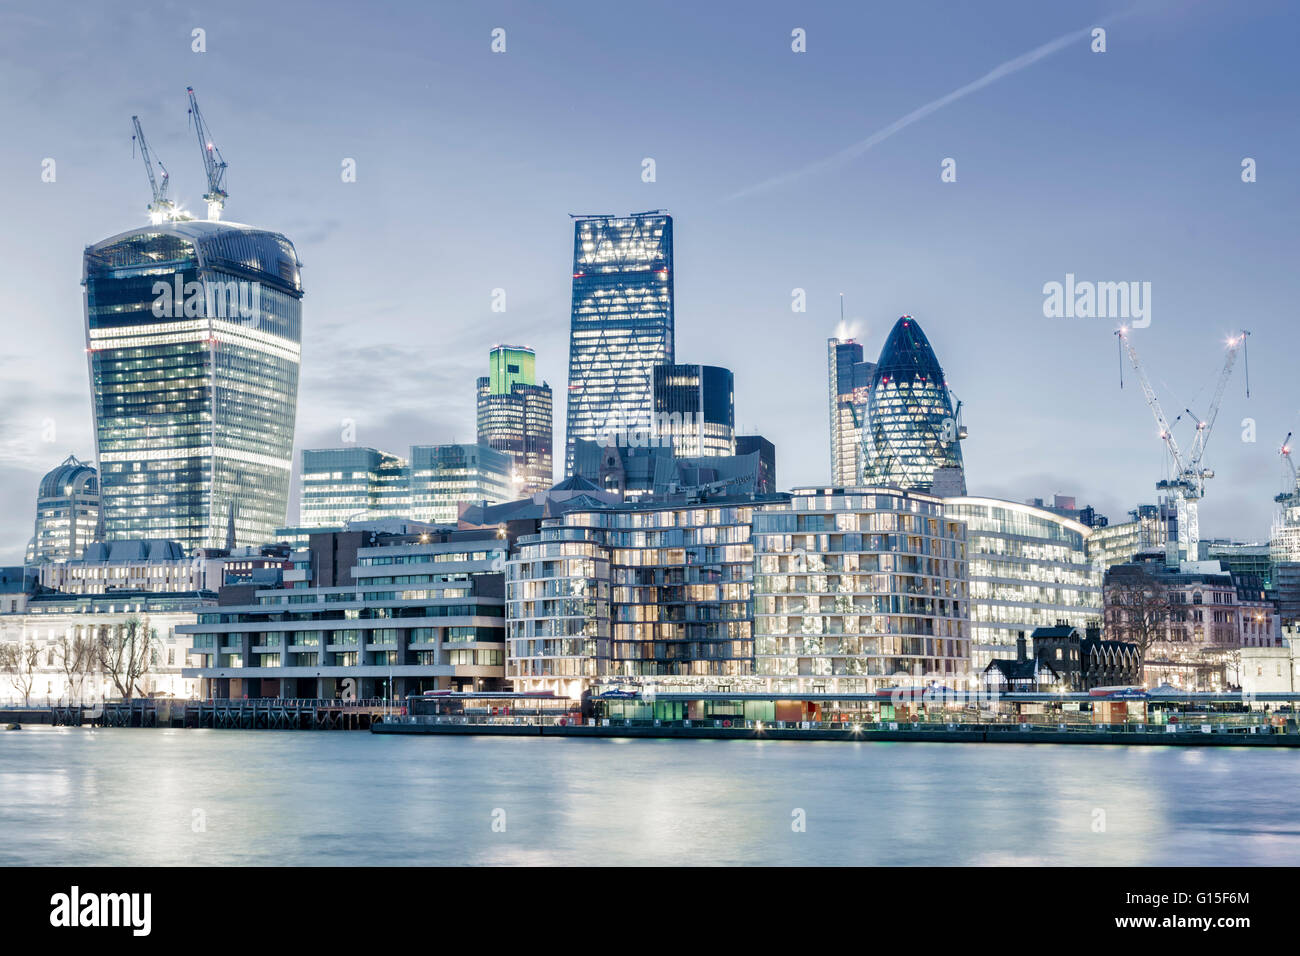 City of London skyline showing the Cheesegrater, the Gherkin, and the Walkie Talkie, London Stock Photo